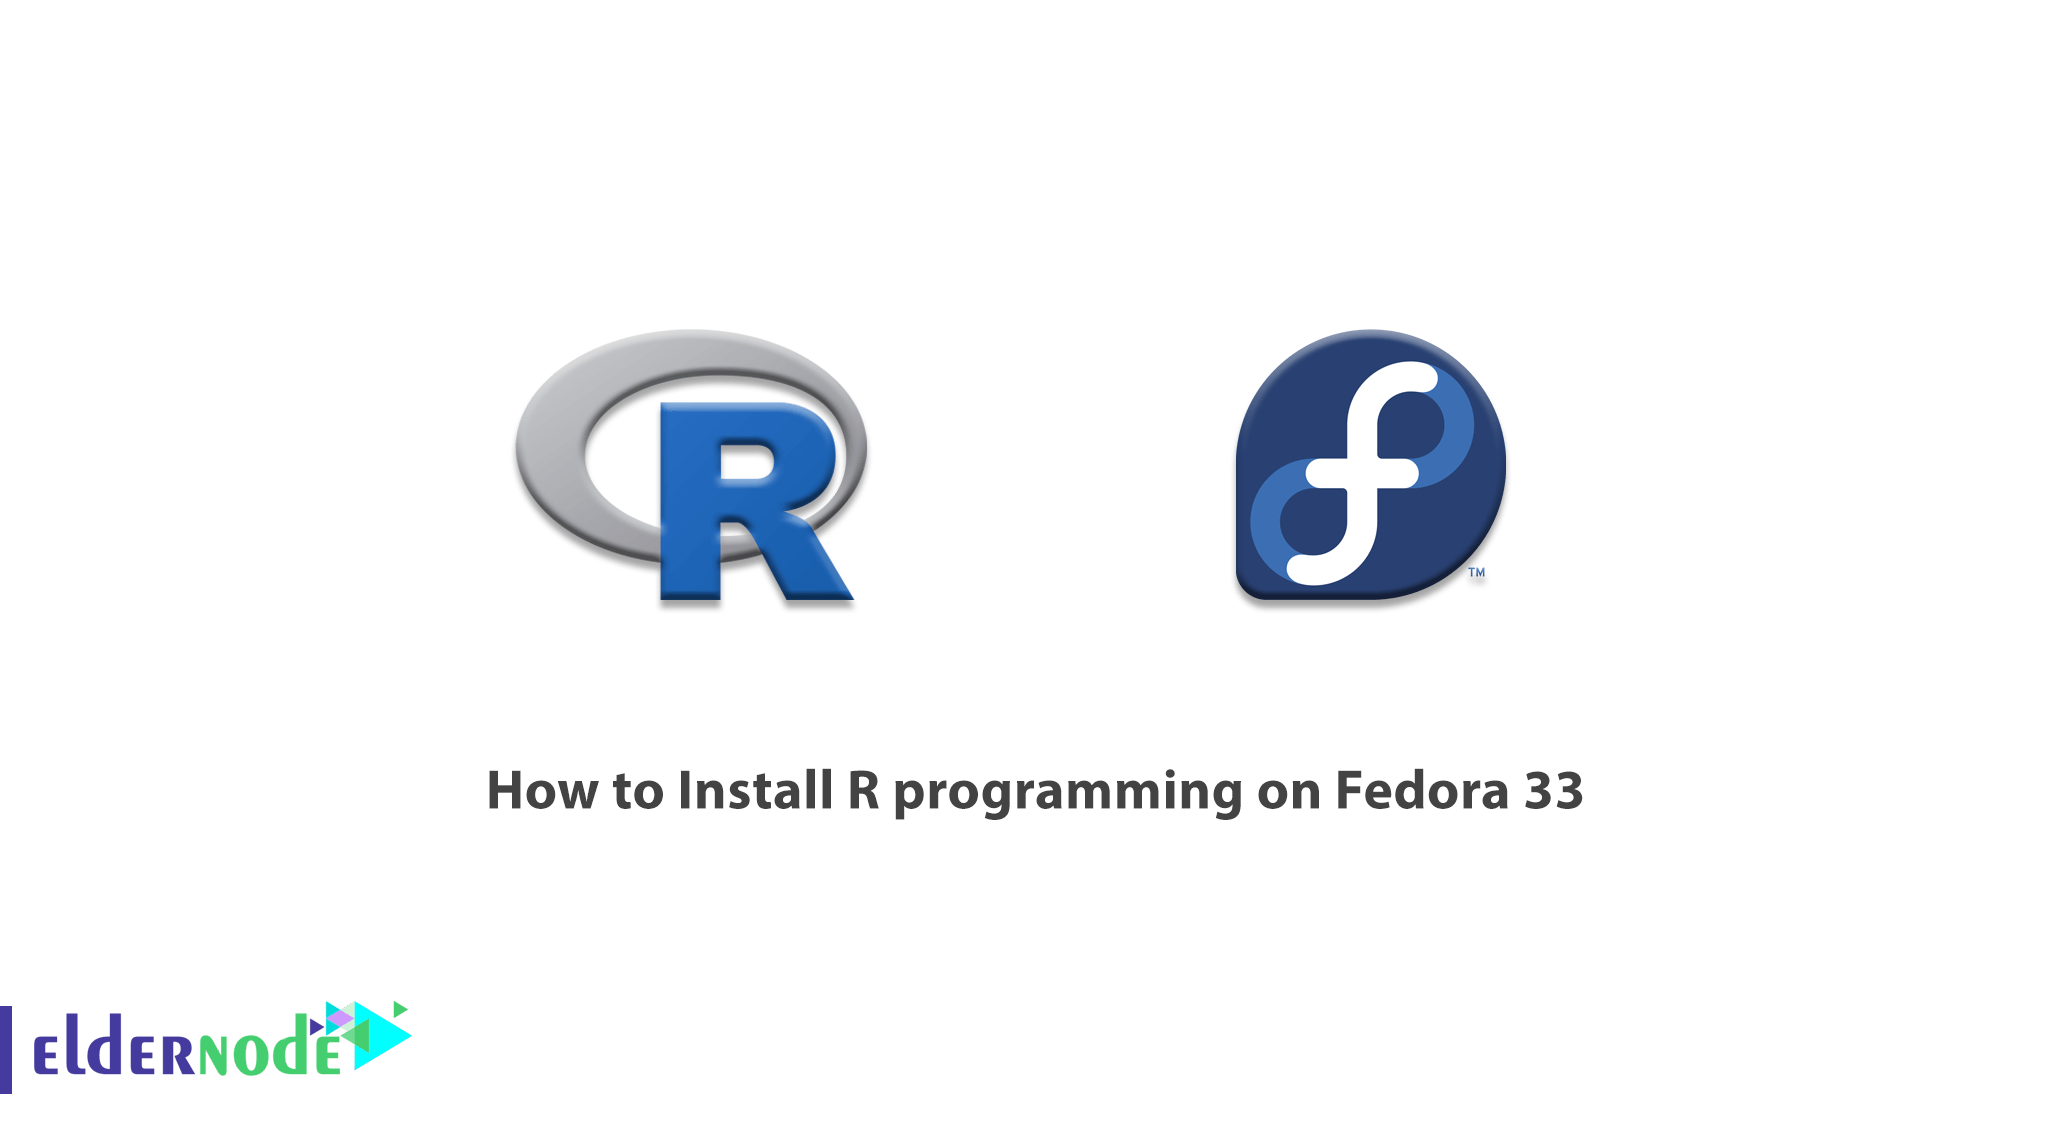 How to Install R programming on Fedora 33